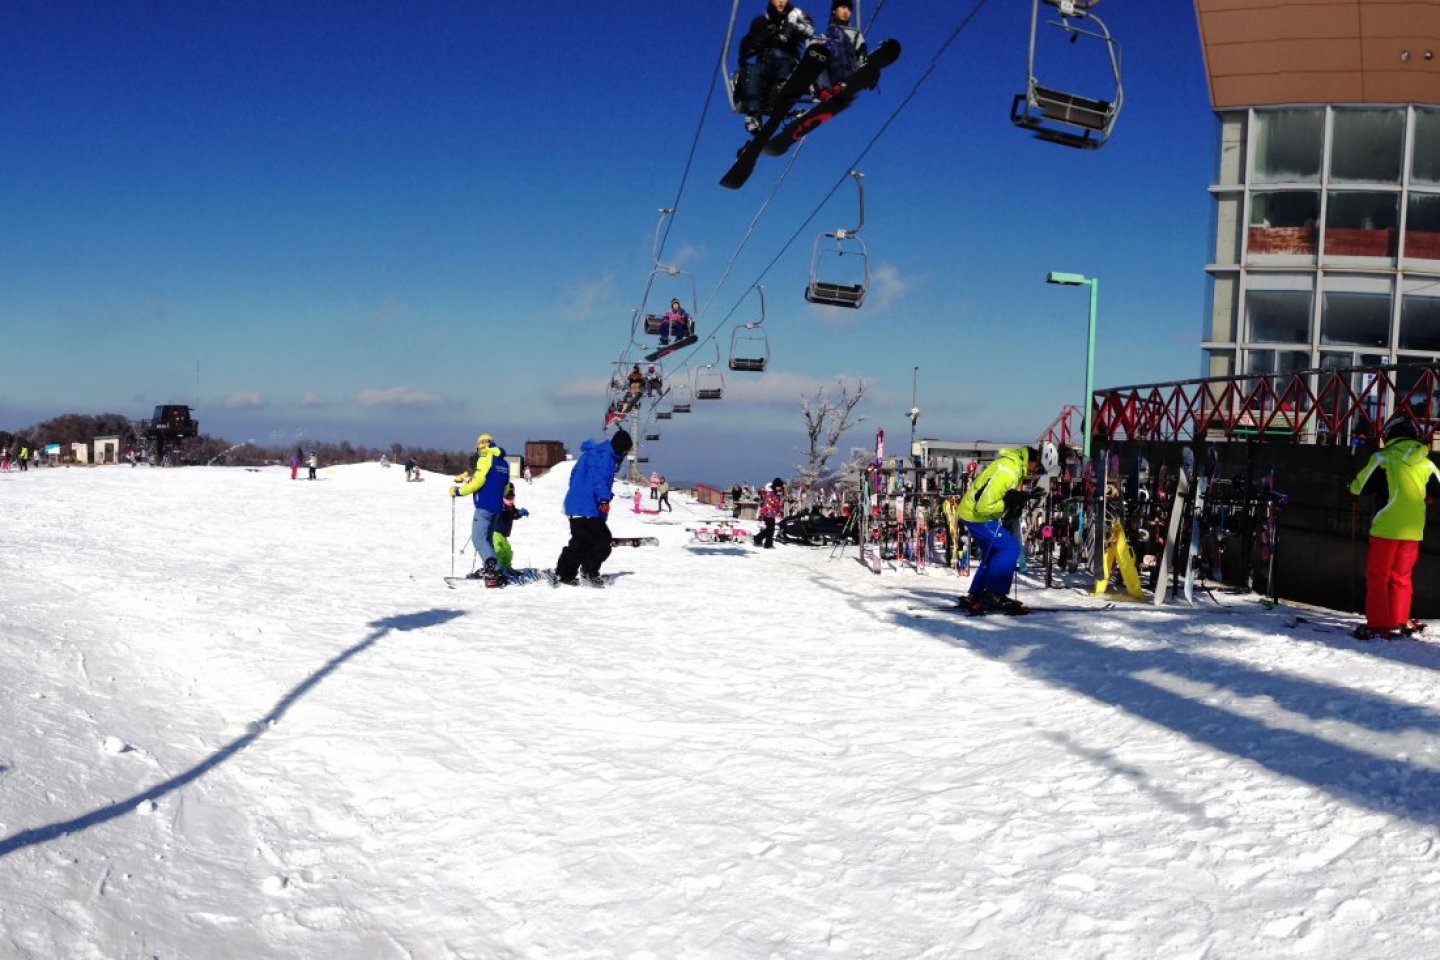 The ski lifts are uncrowded at Gokase